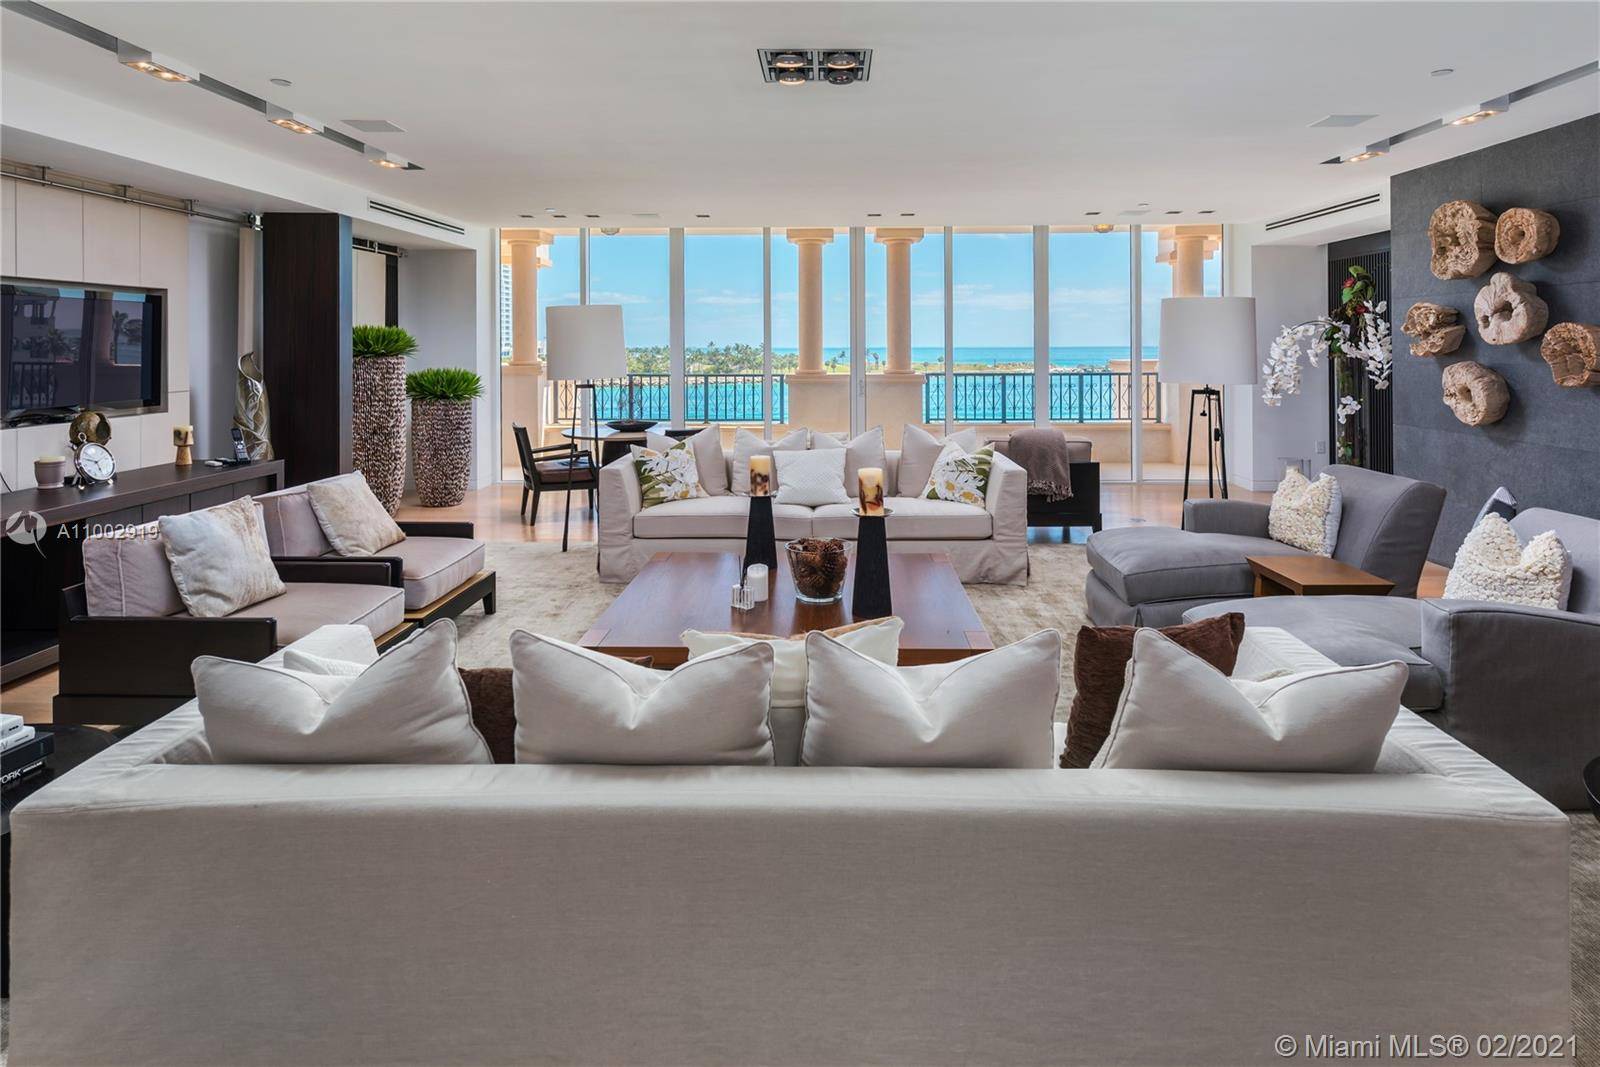 Impeccably Designed Palazzo Del Marre residence with high end European furnishings.